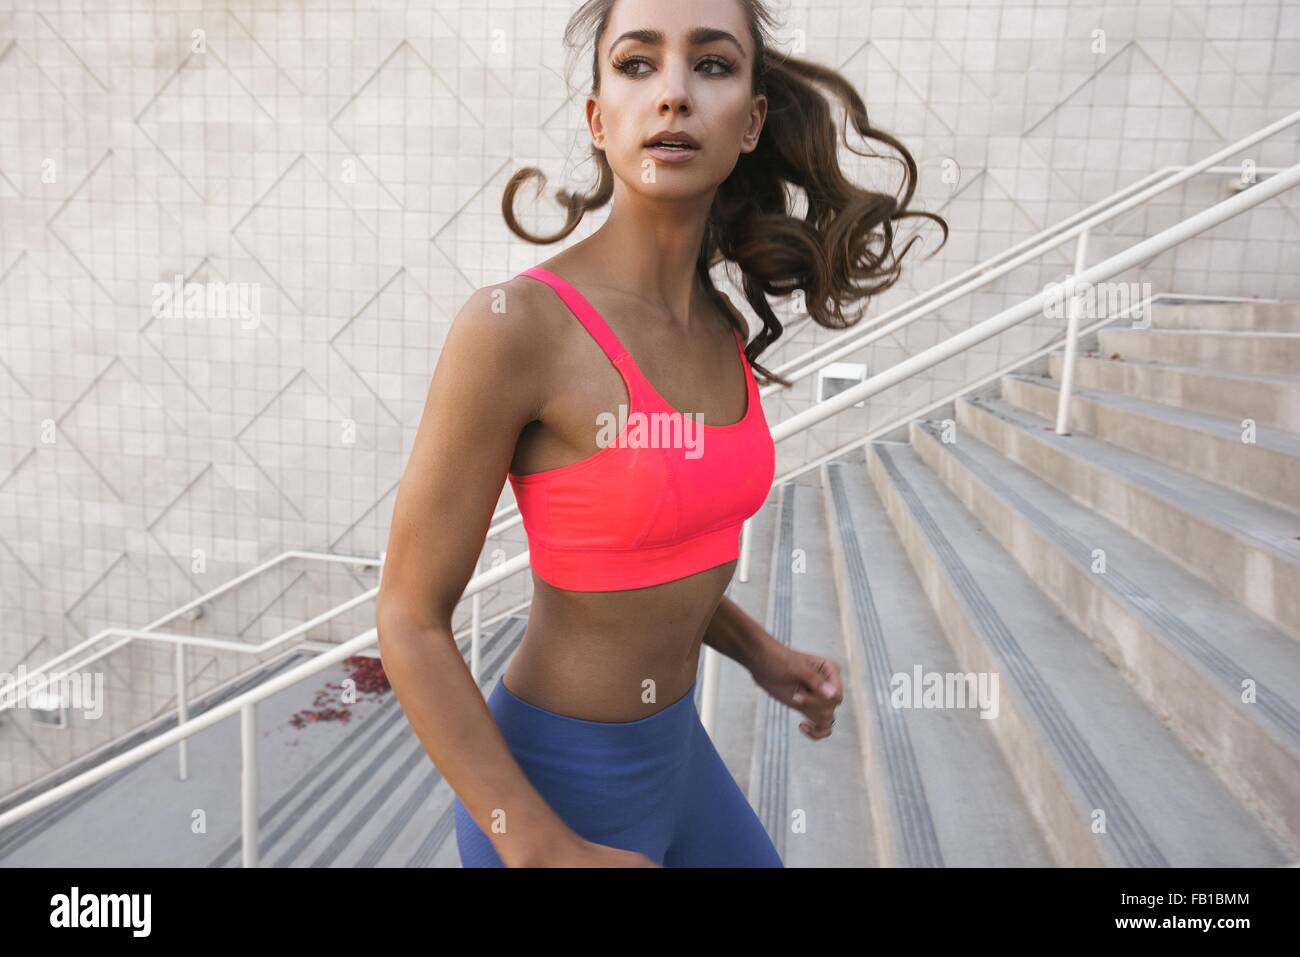 Young woman wearing sports bra running up stairs, looking away Stock Photo